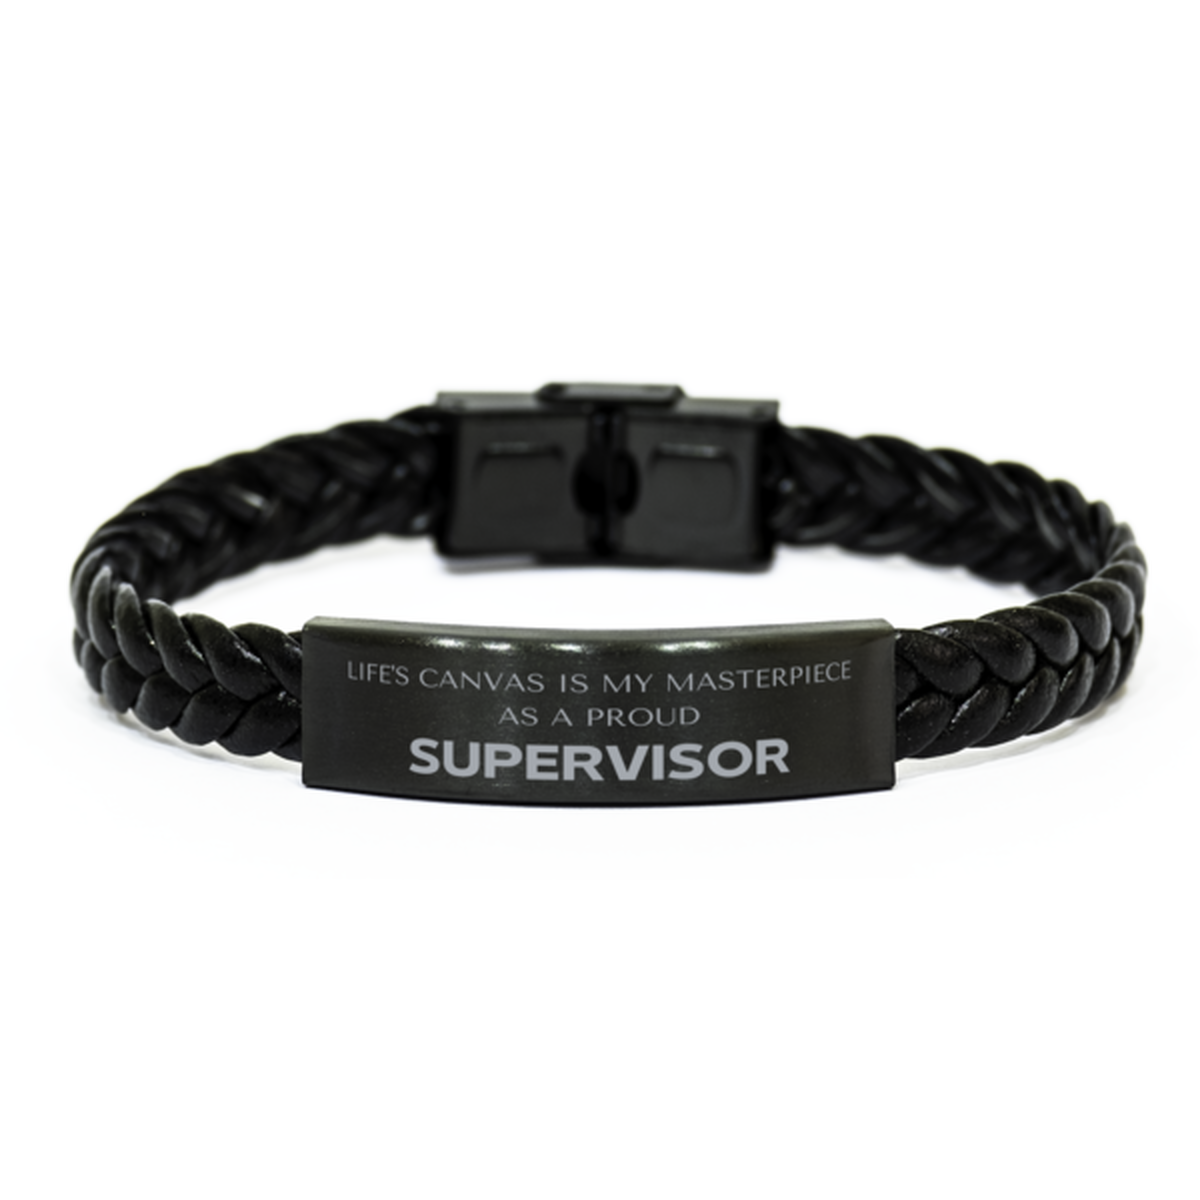 Proud Supervisor Gifts, Life's canvas is my masterpiece, Epic Birthday Christmas Unique Braided Leather Bracelet For Supervisor, Coworkers, Men, Women, Friends